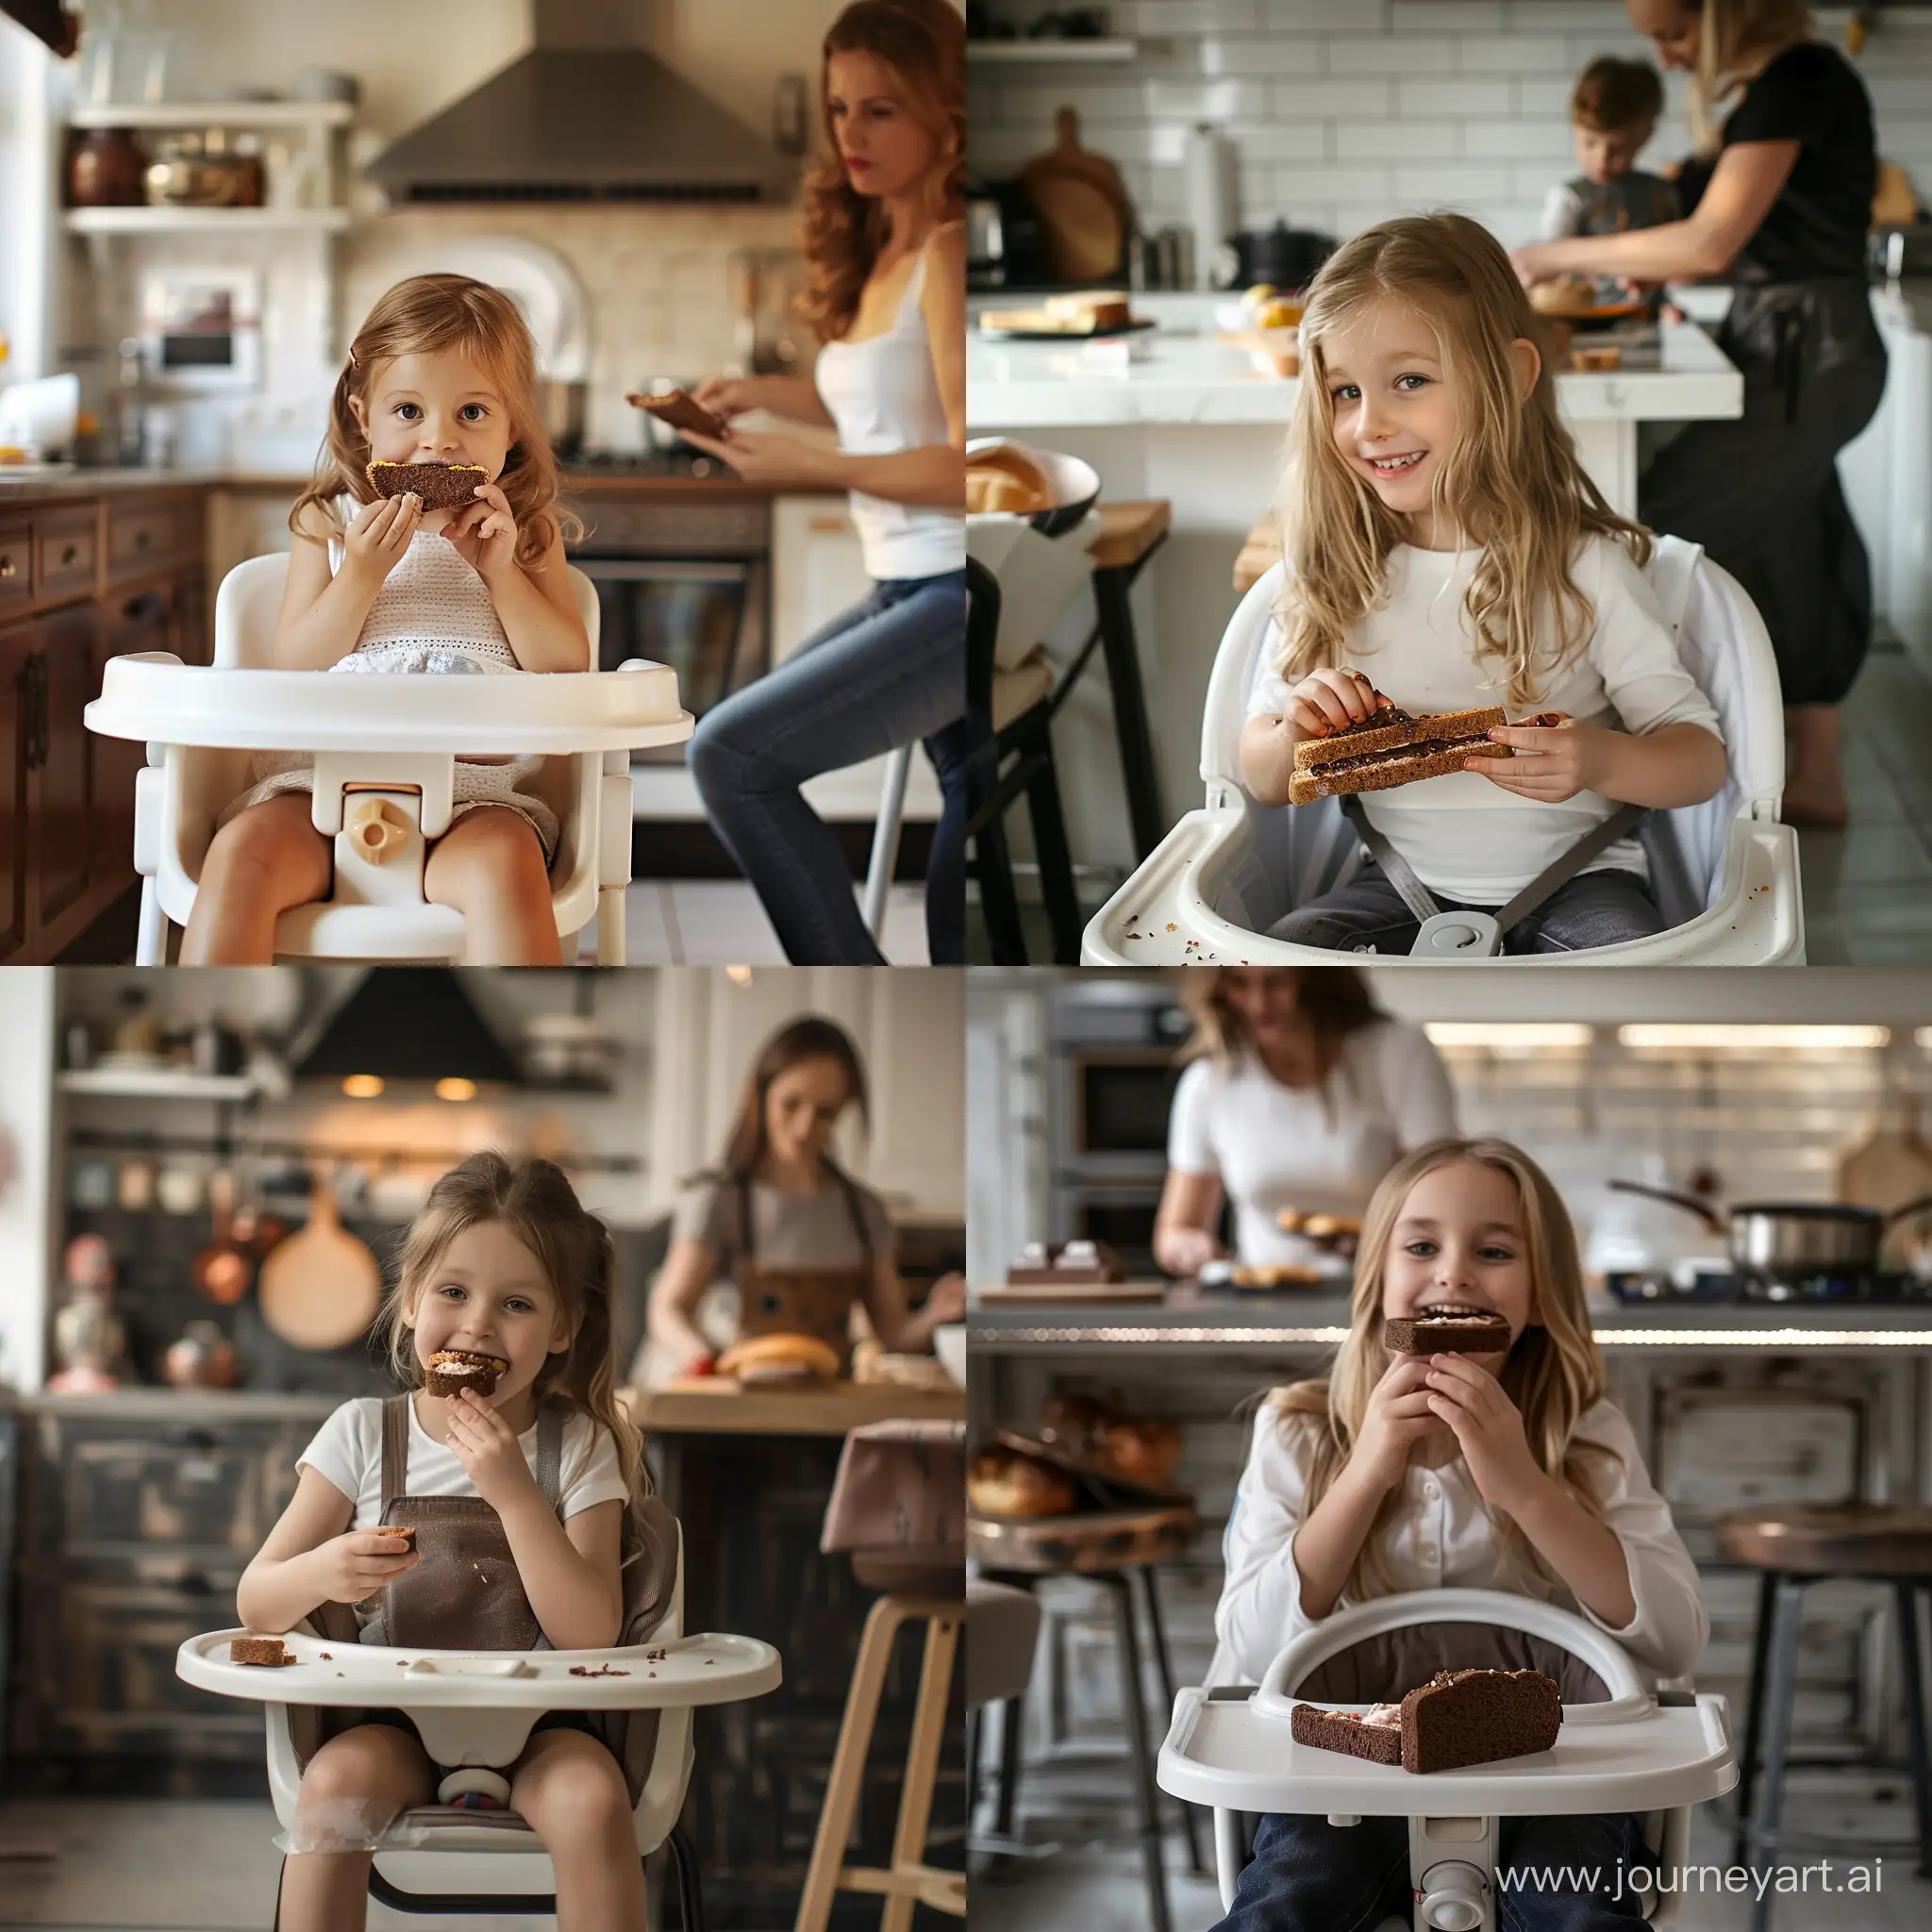 Young-Girl-Enjoying-Chocolate-Sandwich-while-Mother-Cooks-in-Kitchen